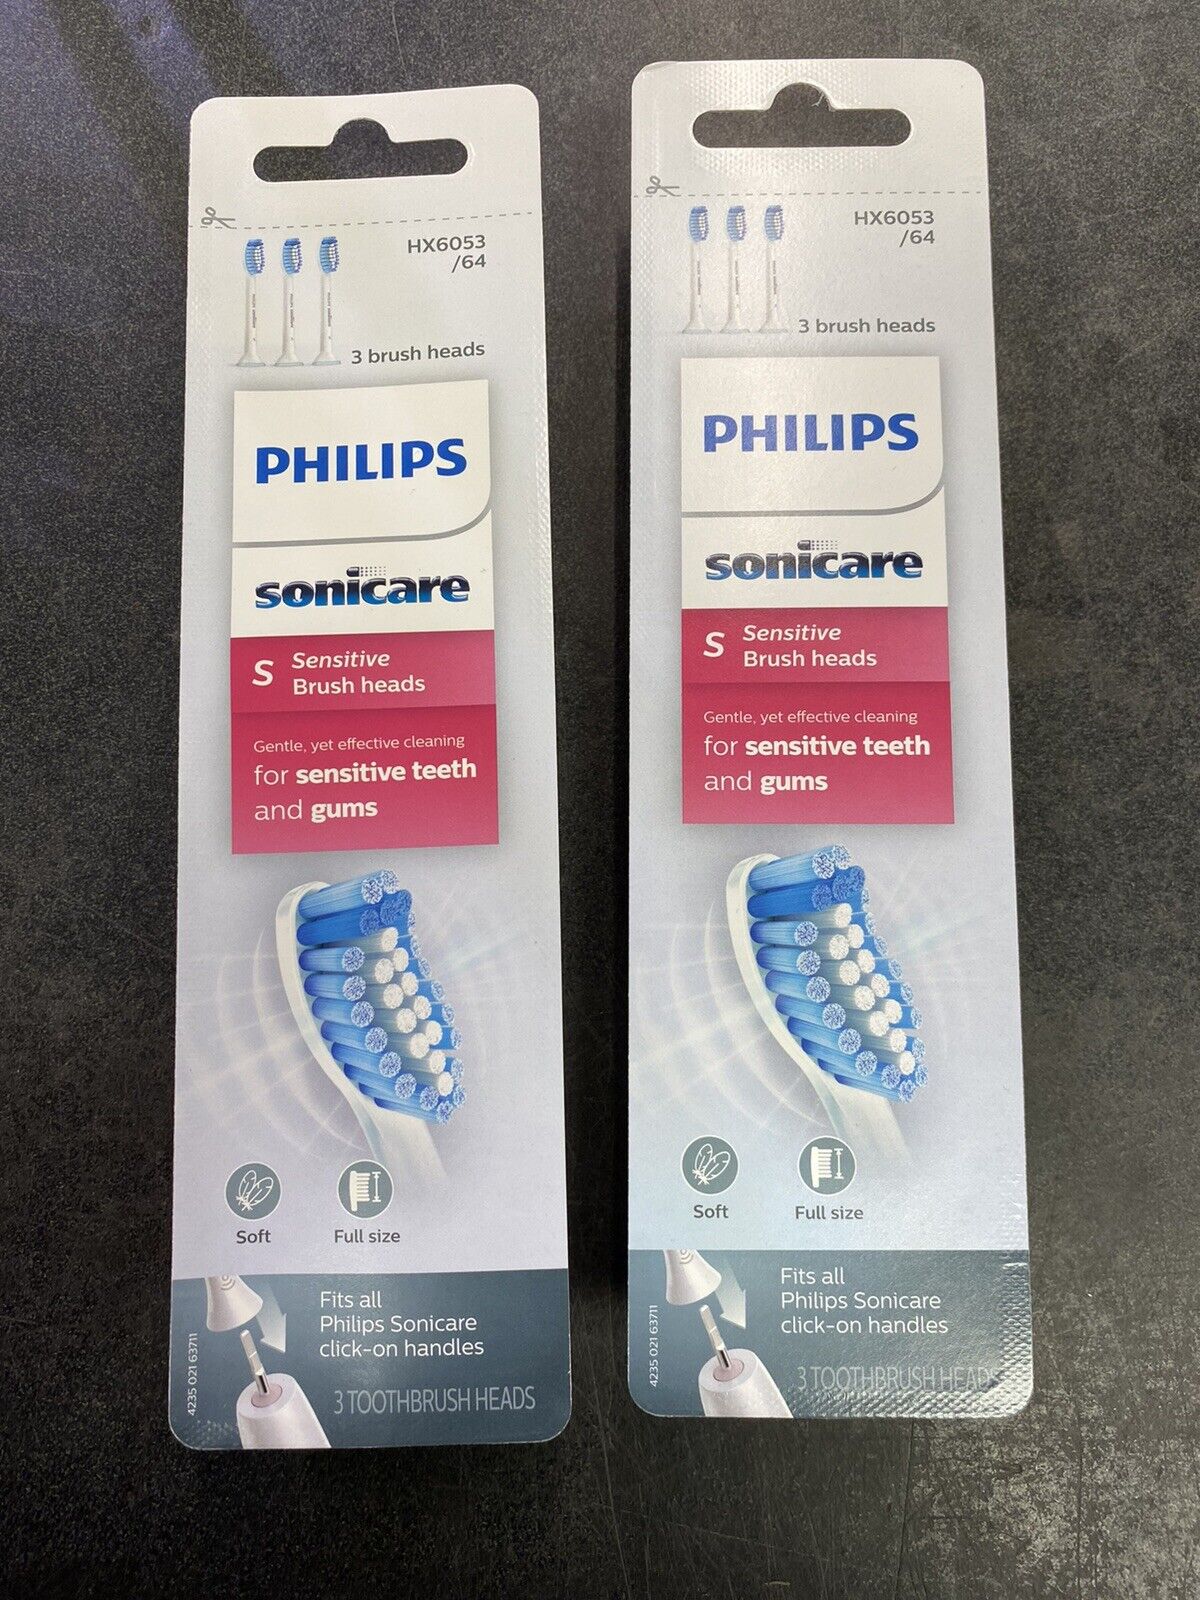 NEW Philips Sonicare HX6053/64 S Sensitive Brush Heads 6 Replacement Heads Total